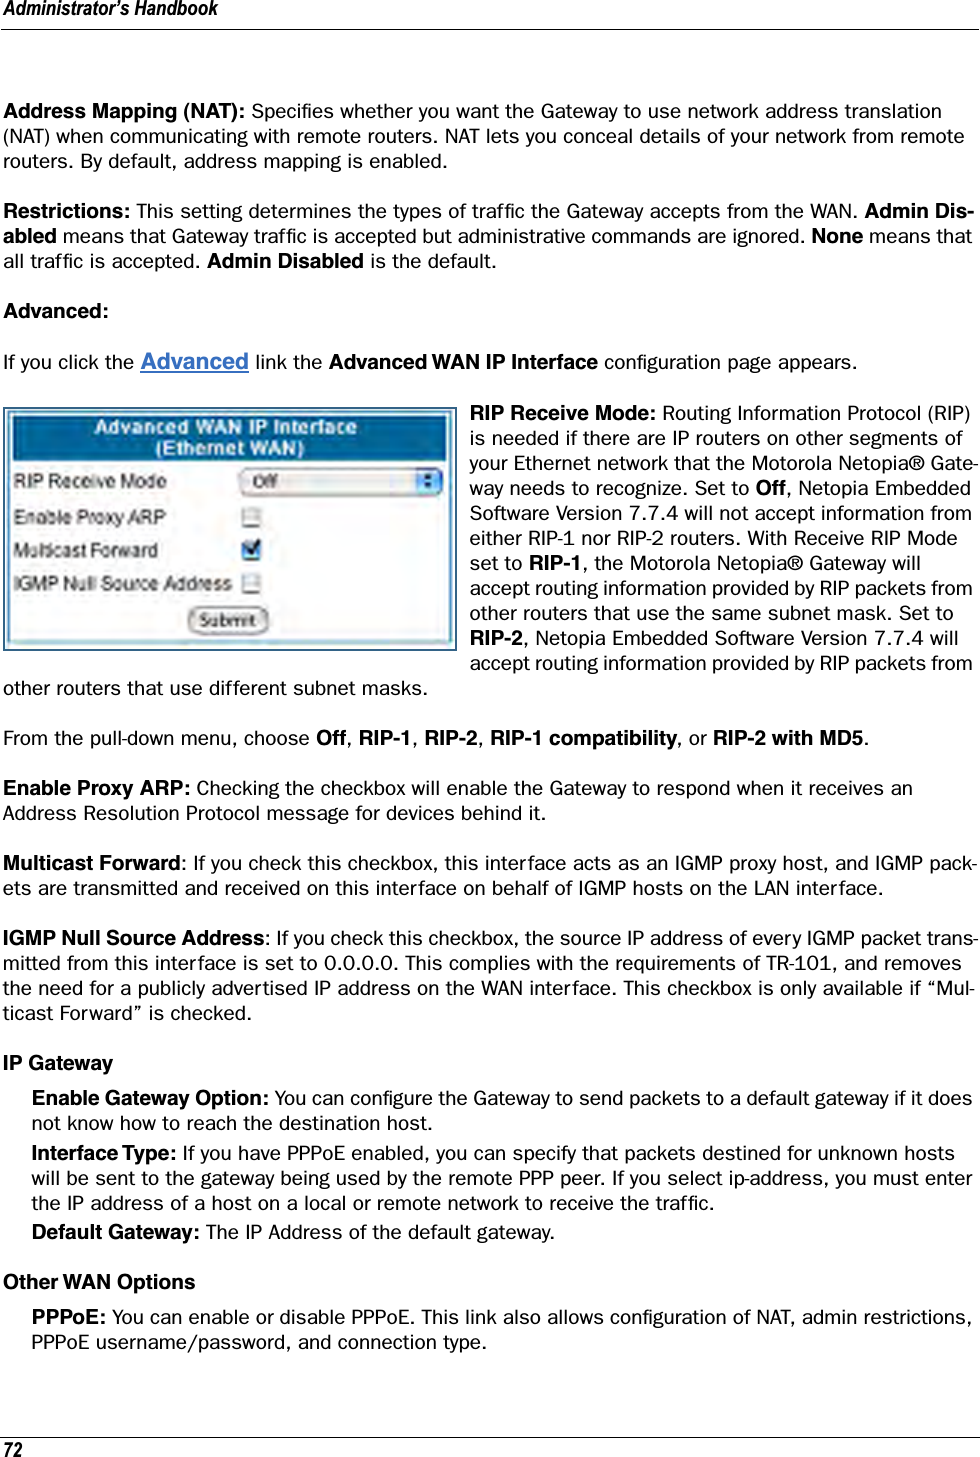 Administrator’s Handbook72Address Mapping (NAT): Speciﬁes whether you want the Gateway to use network address translation (NAT) when communicating with remote routers. NAT lets you conceal details of your network from remote routers. By default, address mapping is enabled.Restrictions: This setting determines the types of trafﬁc the Gateway accepts from the WAN. Admin Dis-abled means that Gateway trafﬁc is accepted but administrative commands are ignored. None means that all trafﬁc is accepted. Admin Disabled is the default.Advanced:If you click the Advanced link the Advanced WAN IP Interface conﬁguration page appears.RIP Receive Mode: Routing Information Protocol (RIP) is needed if there are IP routers on other segments of your Ethernet network that the Motorola Netopia® Gate-way needs to recognize. Set to Off, Netopia Embedded Software Version 7.7.4 will not accept information from either RIP-1 nor RIP-2 routers. With Receive RIP Mode set to RIP-1, the Motorola Netopia® Gateway will accept routing information provided by RIP packets from other routers that use the same subnet mask. Set to RIP-2, Netopia Embedded Software Version 7.7.4 will accept routing information provided by RIP packets from other routers that use different subnet masks.From the pull-down menu, choose Off, RIP-1, RIP-2, RIP-1 compatibility, or RIP-2 with MD5.Enable Proxy ARP: Checking the checkbox will enable the Gateway to respond when it receives an Address Resolution Protocol message for devices behind it.Multicast Forward: If you check this checkbox, this interface acts as an IGMP proxy host, and IGMP pack-ets are transmitted and received on this interface on behalf of IGMP hosts on the LAN interface.IGMP Null Source Address: If you check this checkbox, the source IP address of every IGMP packet trans-mitted from this interface is set to 0.0.0.0. This complies with the requirements of TR-101, and removes the need for a publicly advertised IP address on the WAN interface. This checkbox is only available if “Mul-ticast Forward” is checked.IP GatewayEnable Gateway Option: You can conﬁgure the Gateway to send packets to a default gateway if it does not know how to reach the destination host.Interface Type: If you have PPPoE enabled, you can specify that packets destined for unknown hosts will be sent to the gateway being used by the remote PPP peer. If you select ip-address, you must enter the IP address of a host on a local or remote network to receive the trafﬁc.Default Gateway: The IP Address of the default gateway.Other WAN OptionsPPPoE: You can enable or disable PPPoE. This link also allows conﬁguration of NAT, admin restrictions, PPPoE username/password, and connection type.